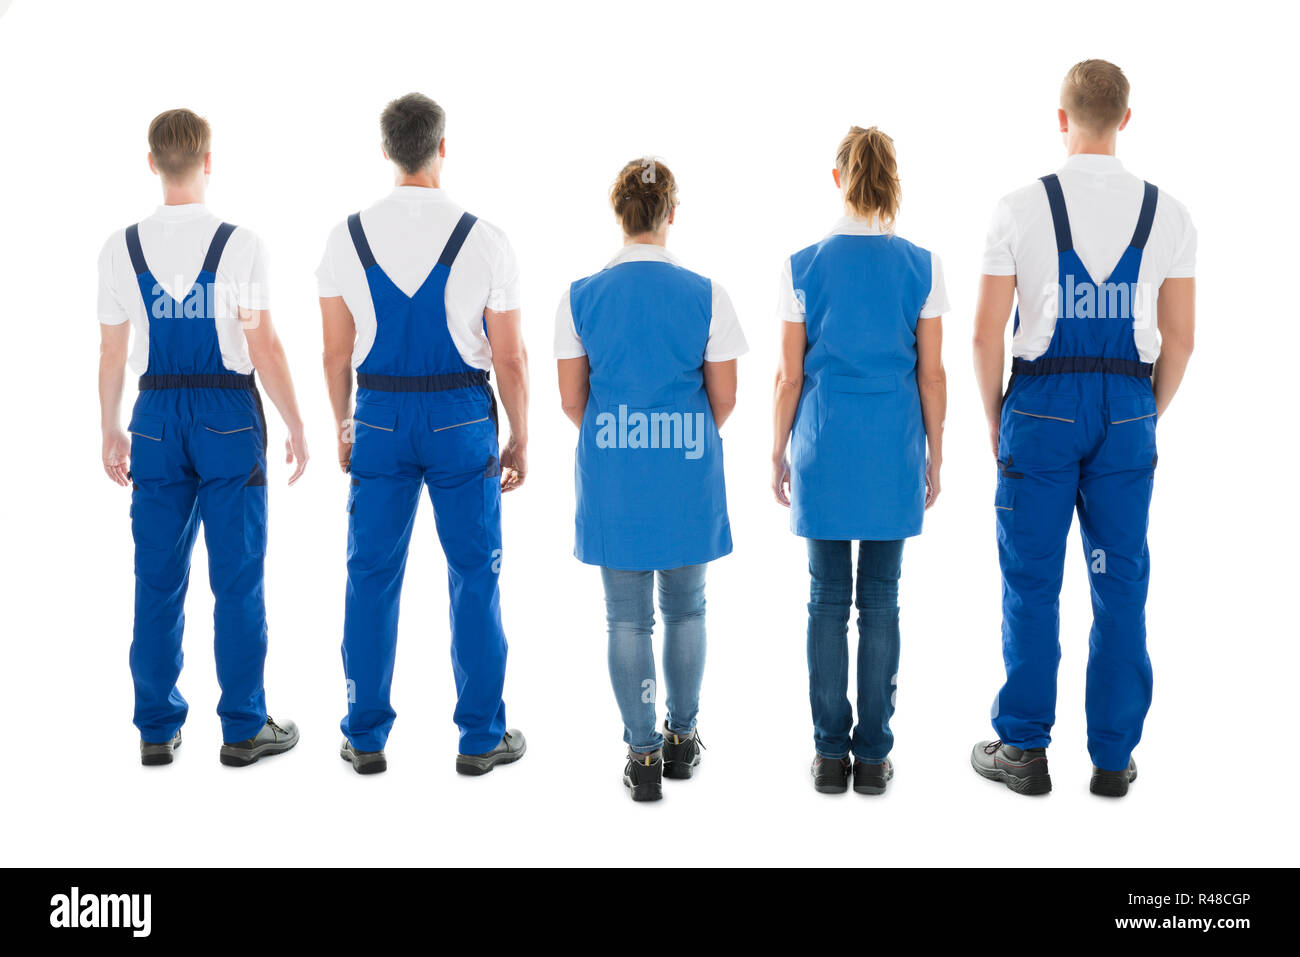 Rear View Of Male And Female Janitors Standing In Row Stock Photo